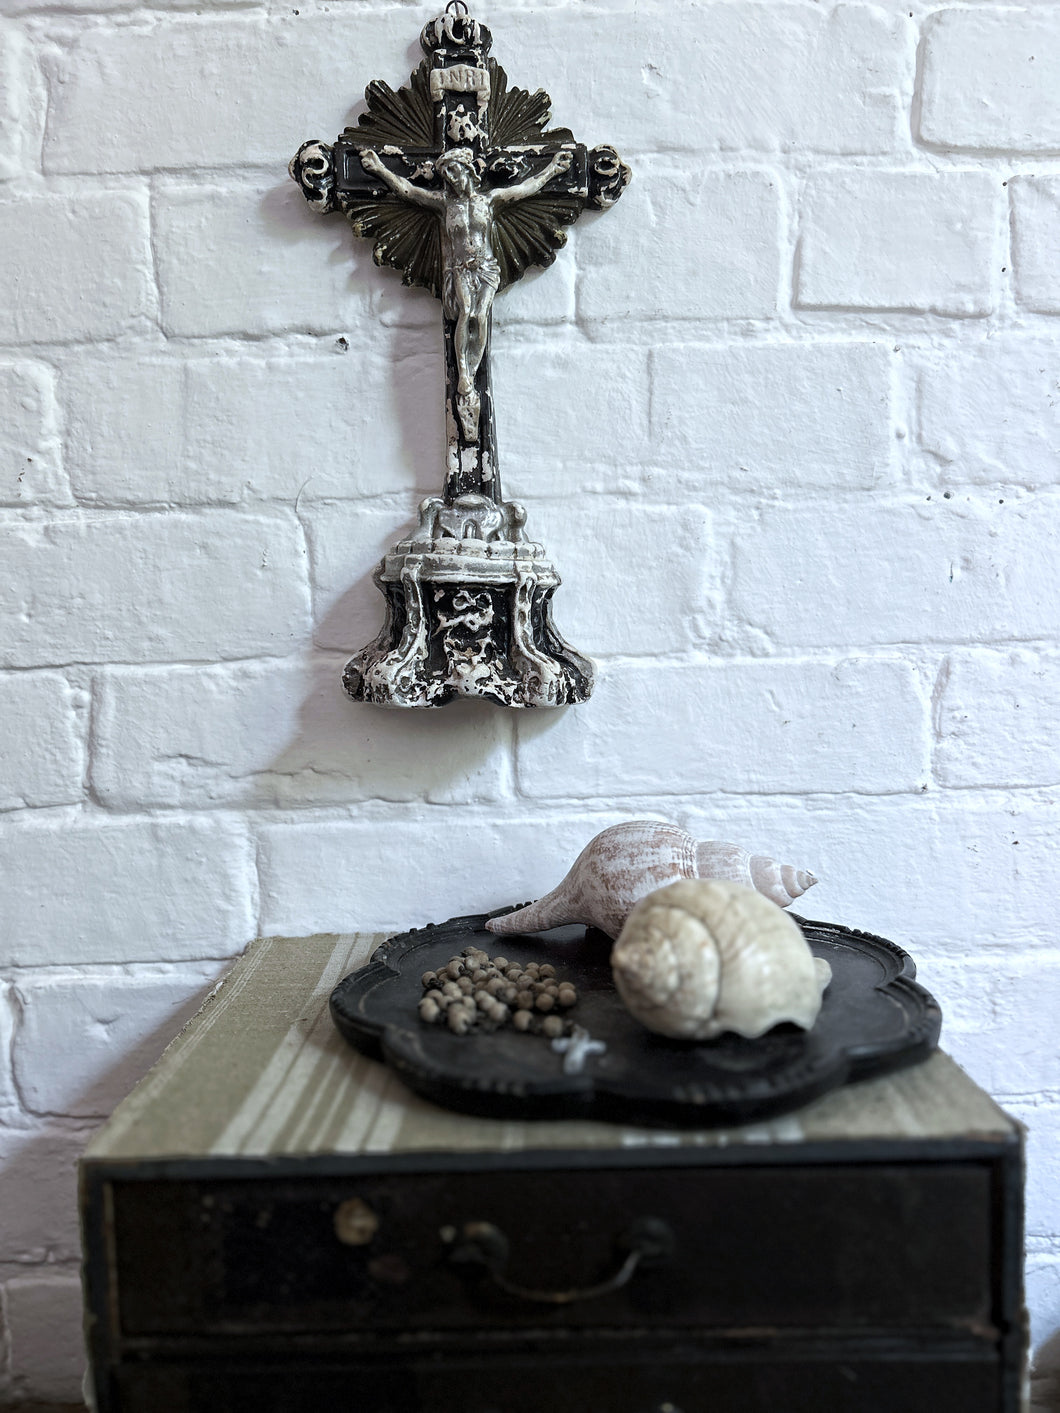 A French antique church wall hung plaster cross & religious figure